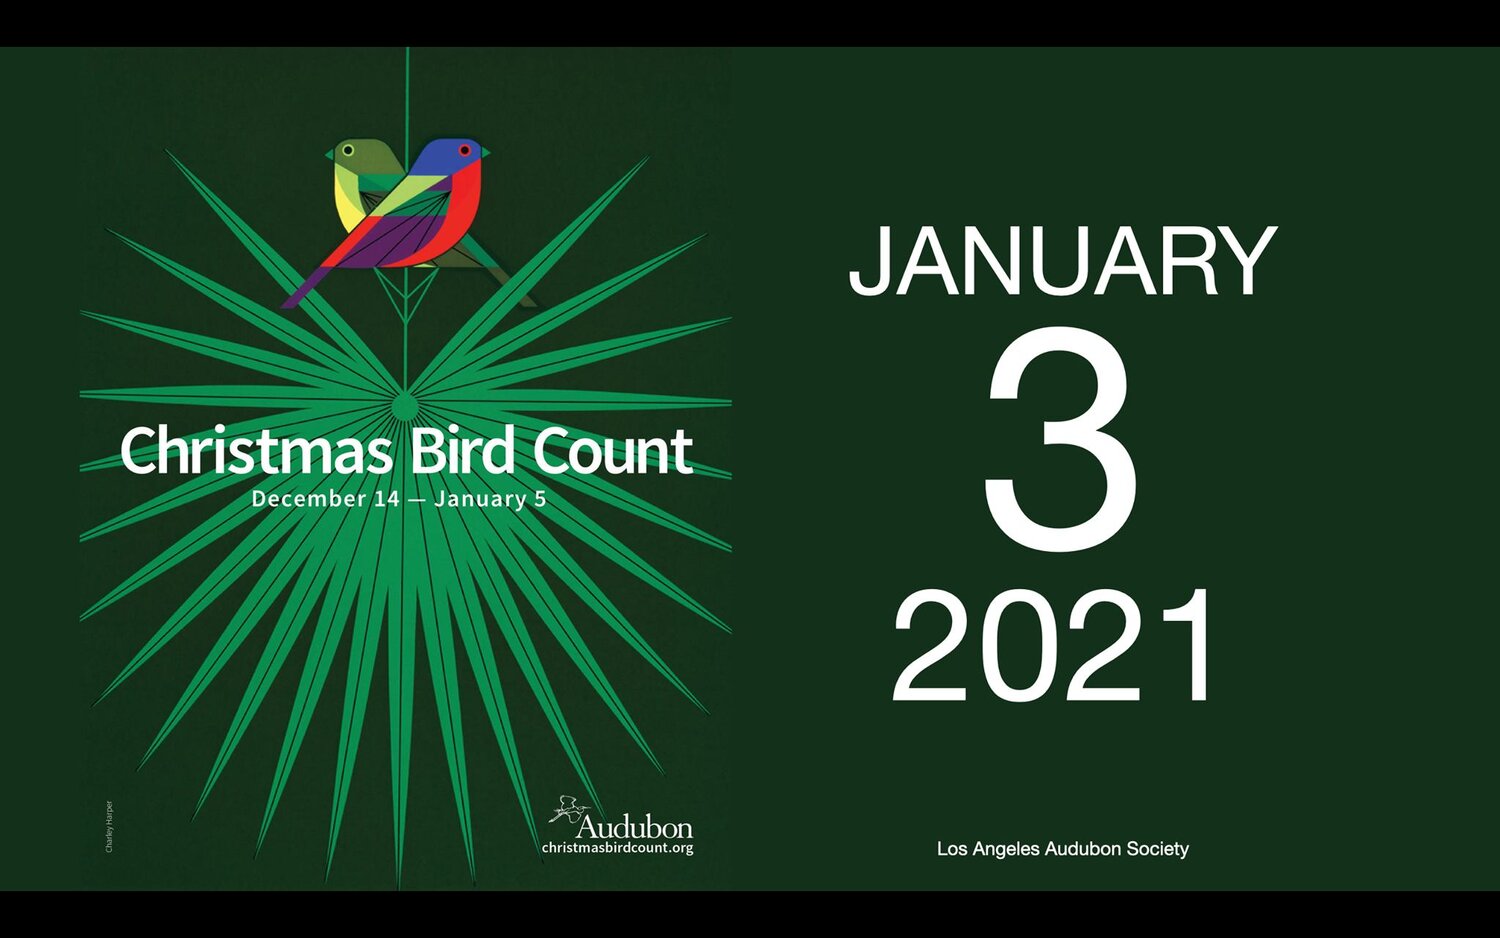 Dates For 2021 Christmas Bird Count